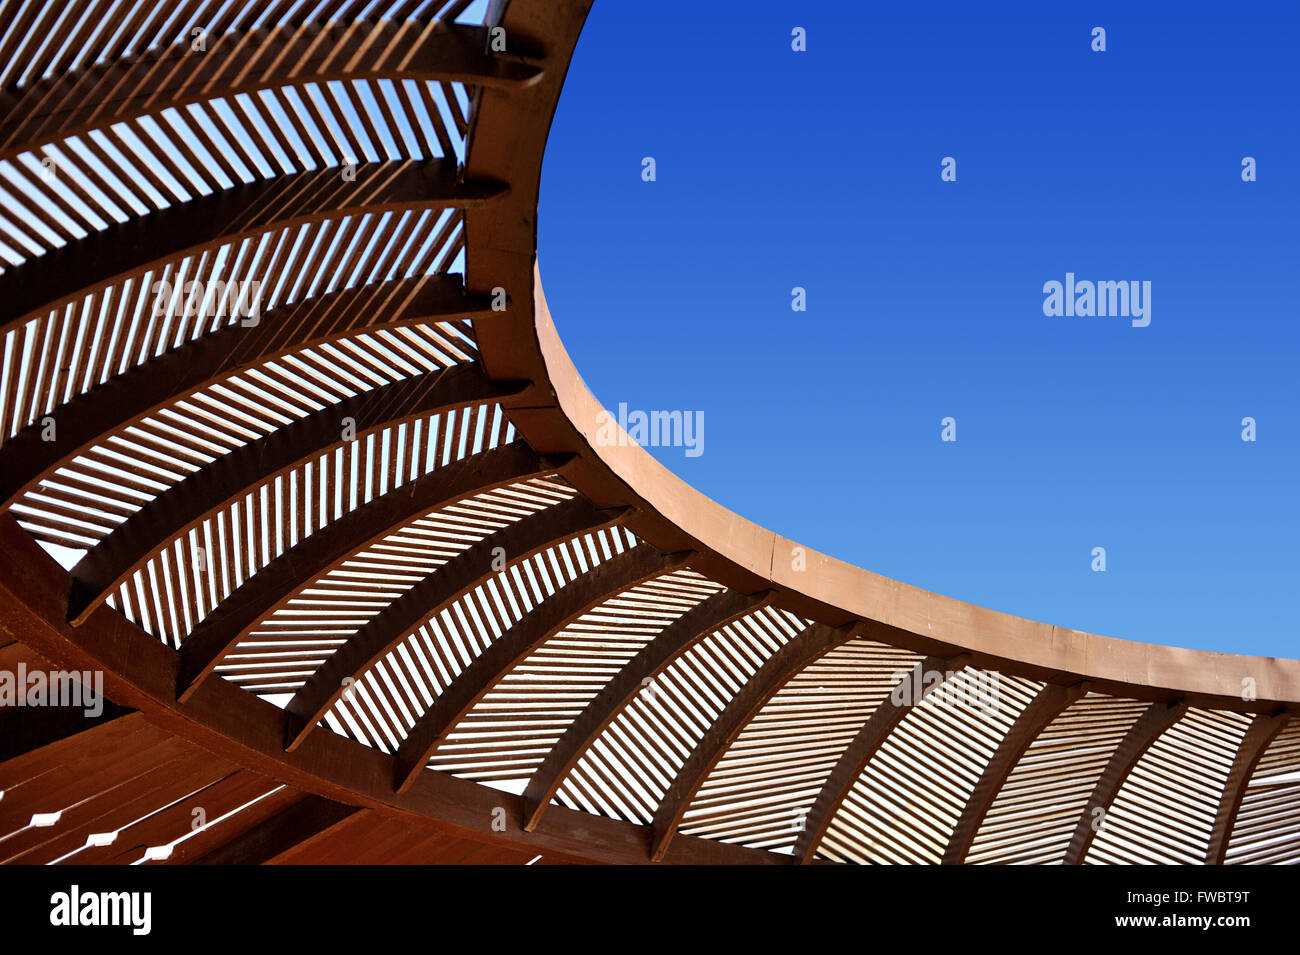 Wooden ceiling gazebo and blue sky Stock Photo